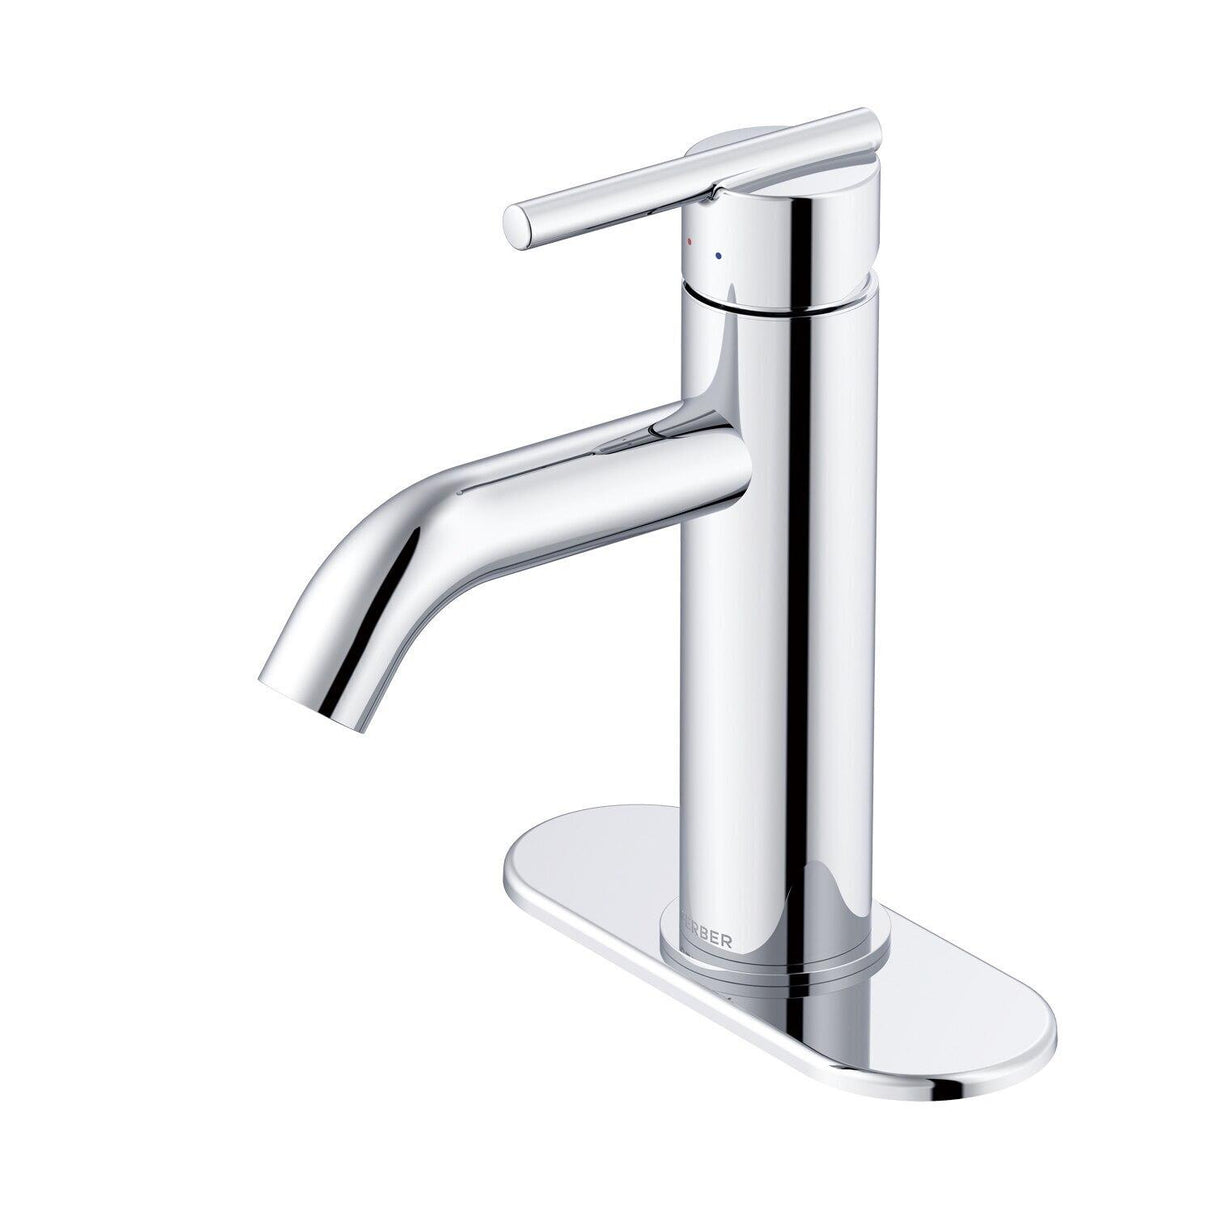 Gerber D225458BB Parma Single Handle Bathroom Faucet With Metal Touch Down Drain ...